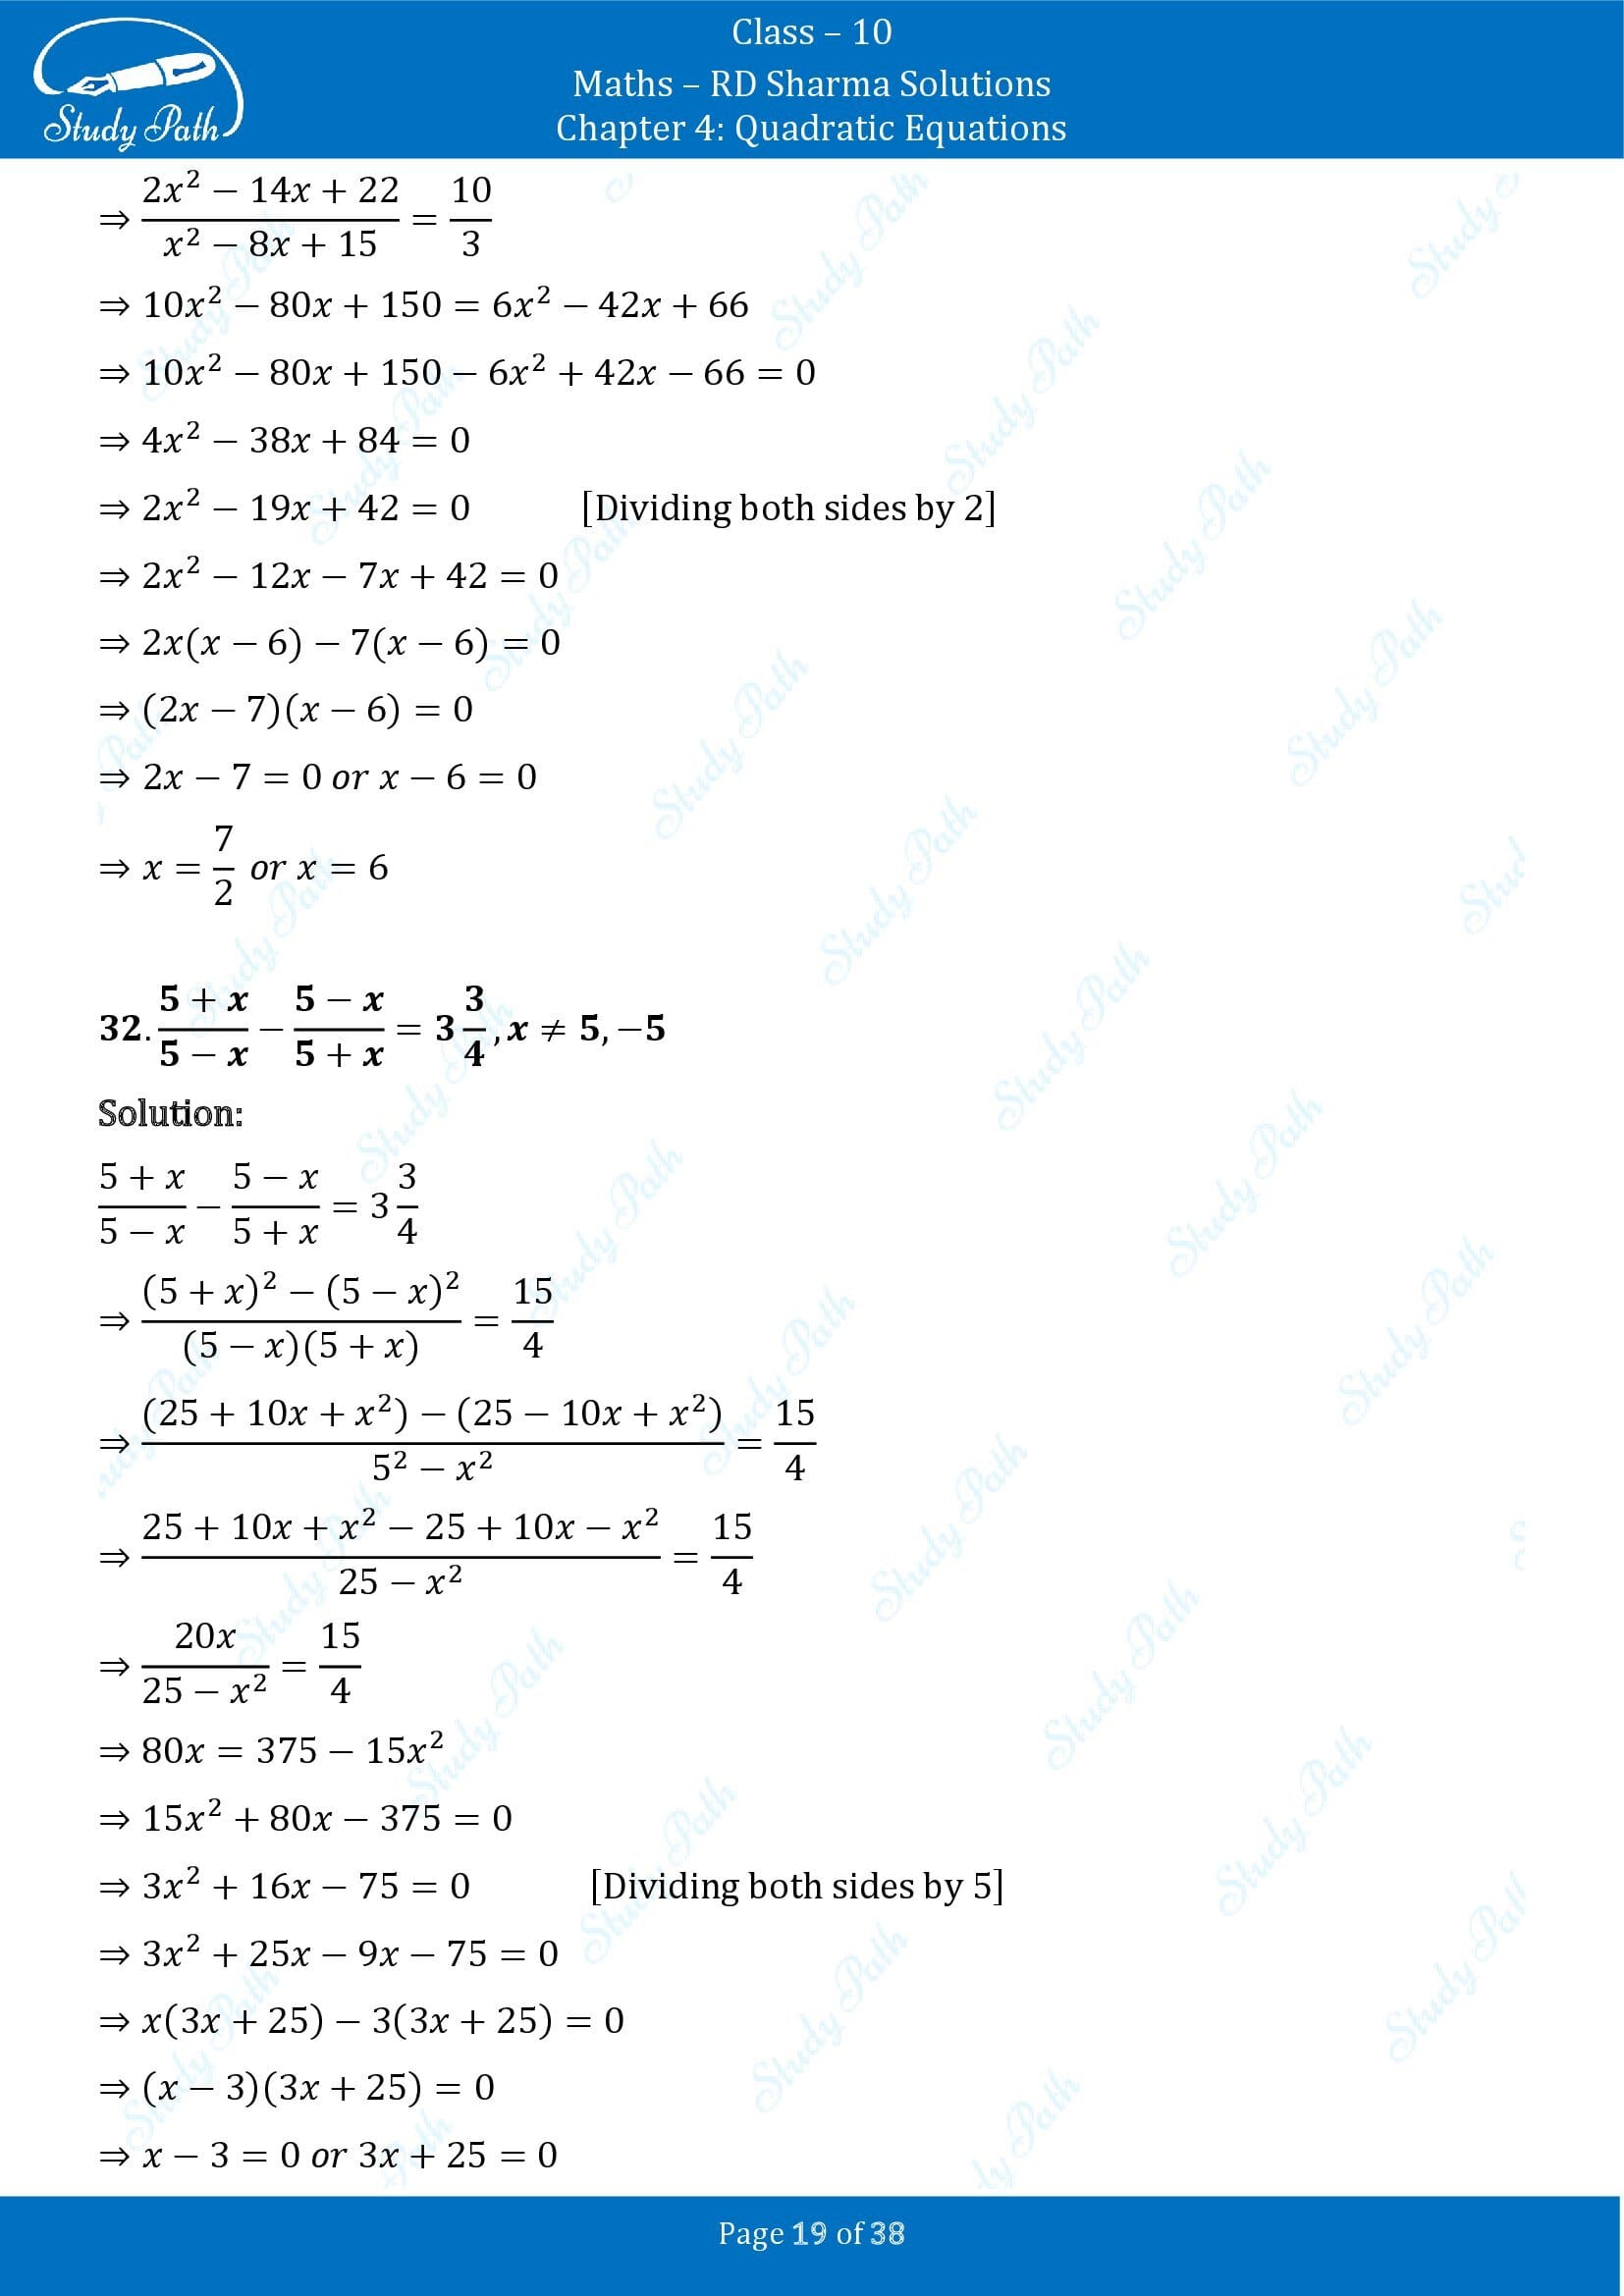 RD Sharma Solutions Class 10 Chapter 4 Quadratic Equations Exercise 4.3 00019